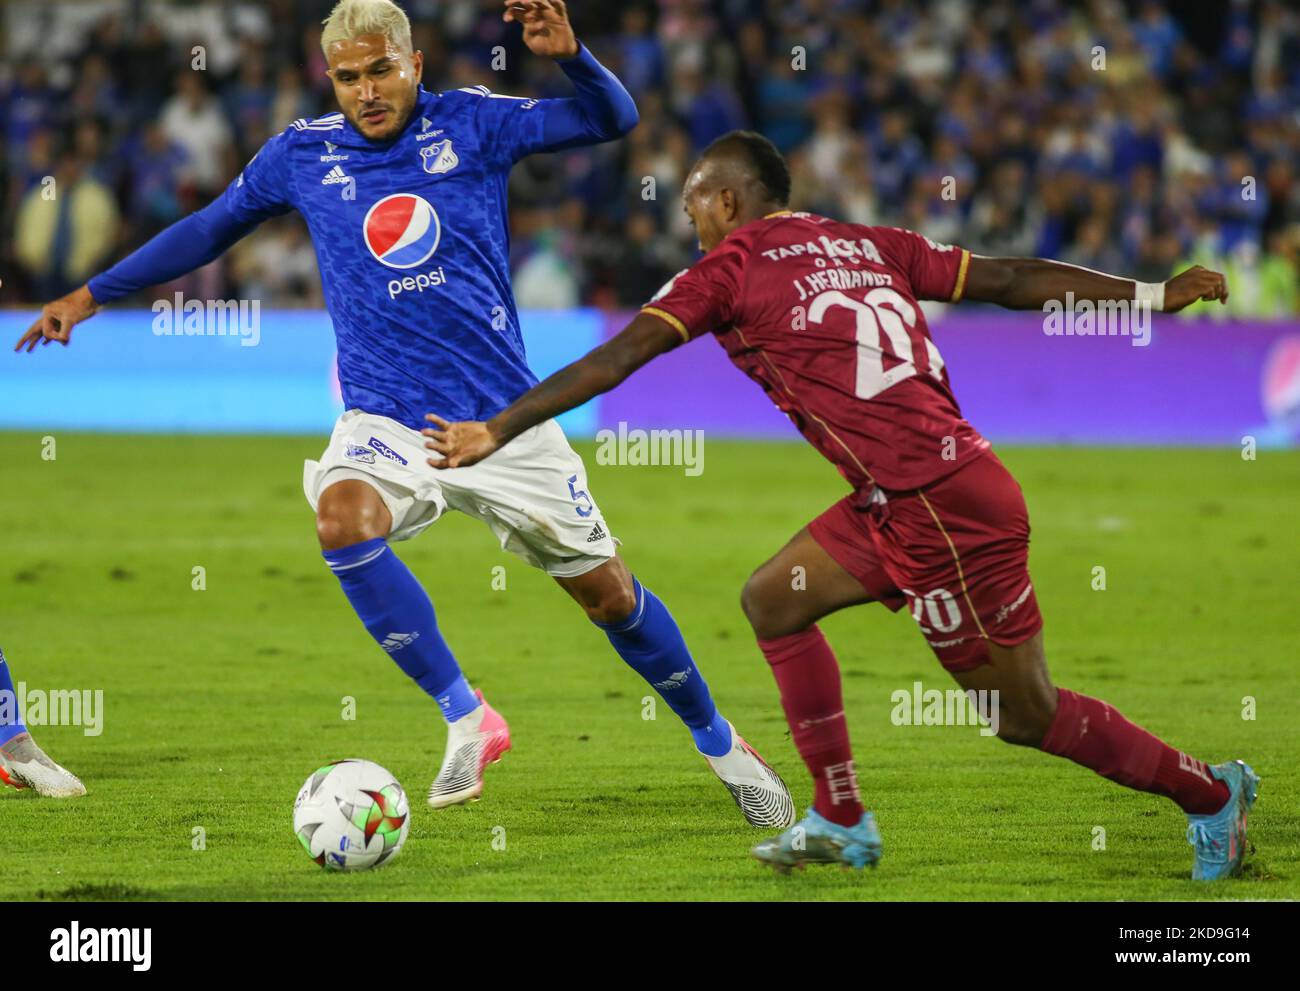 Larry Vasquez of Millonarios and Junior Hernandez of Tolima fight for the ball during the Millonarios vs Tolima BetPlay DIMAYOR League match at Estadio Nemesio Camacho El Campin stadium in Bogota, Colombia on May 8, 2022, match that would end 0 - 0. (Photo by Daniel Garzon Herazo/NurPhoto) Stock Photo